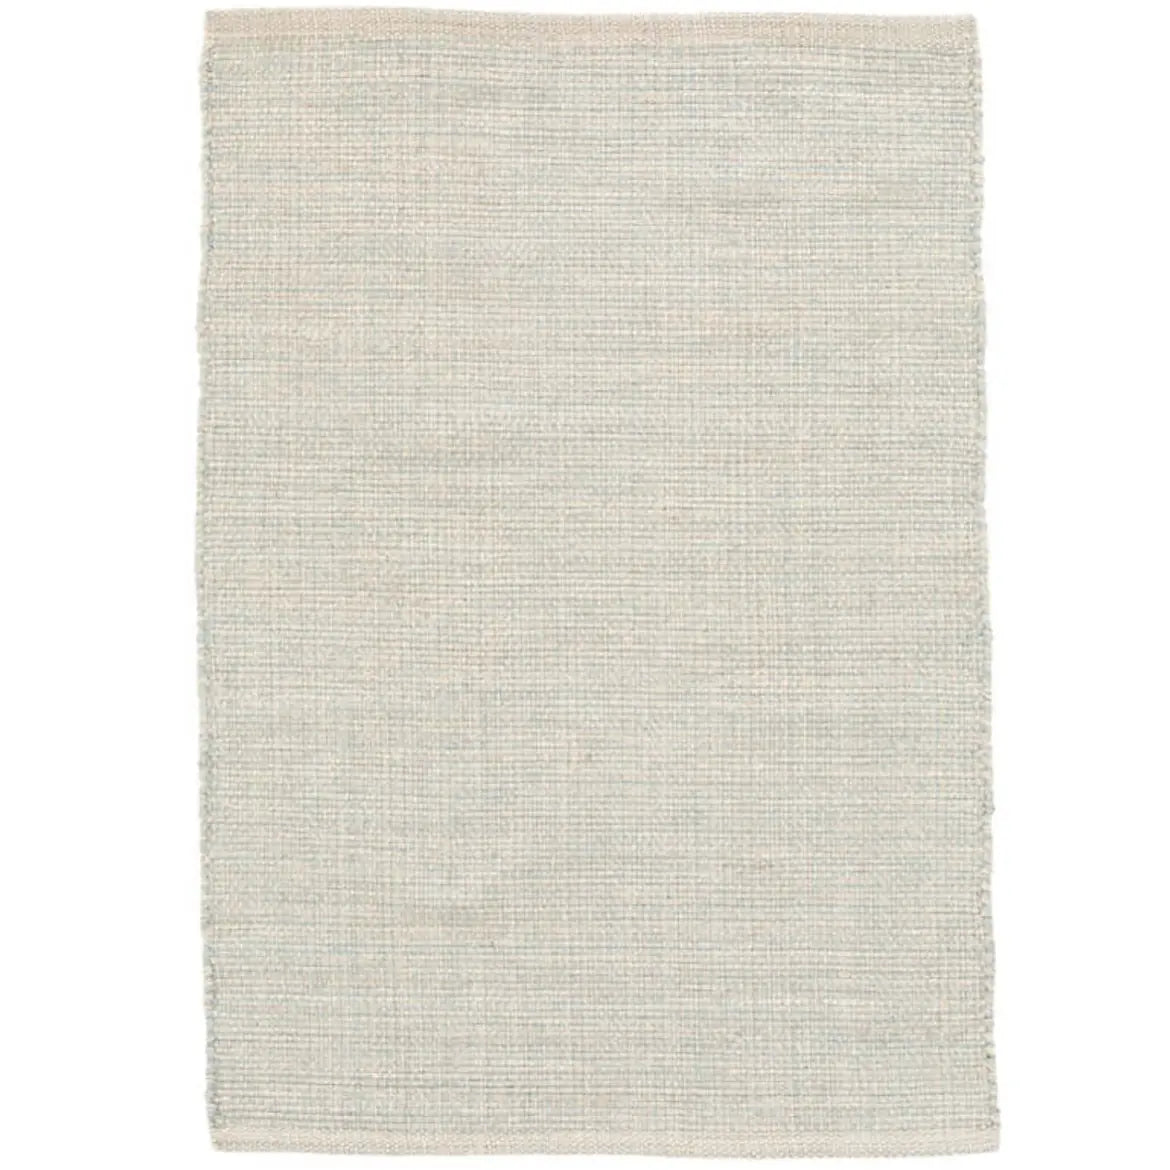 Marled Light Blue Woven Cotton Rug - Home Smith